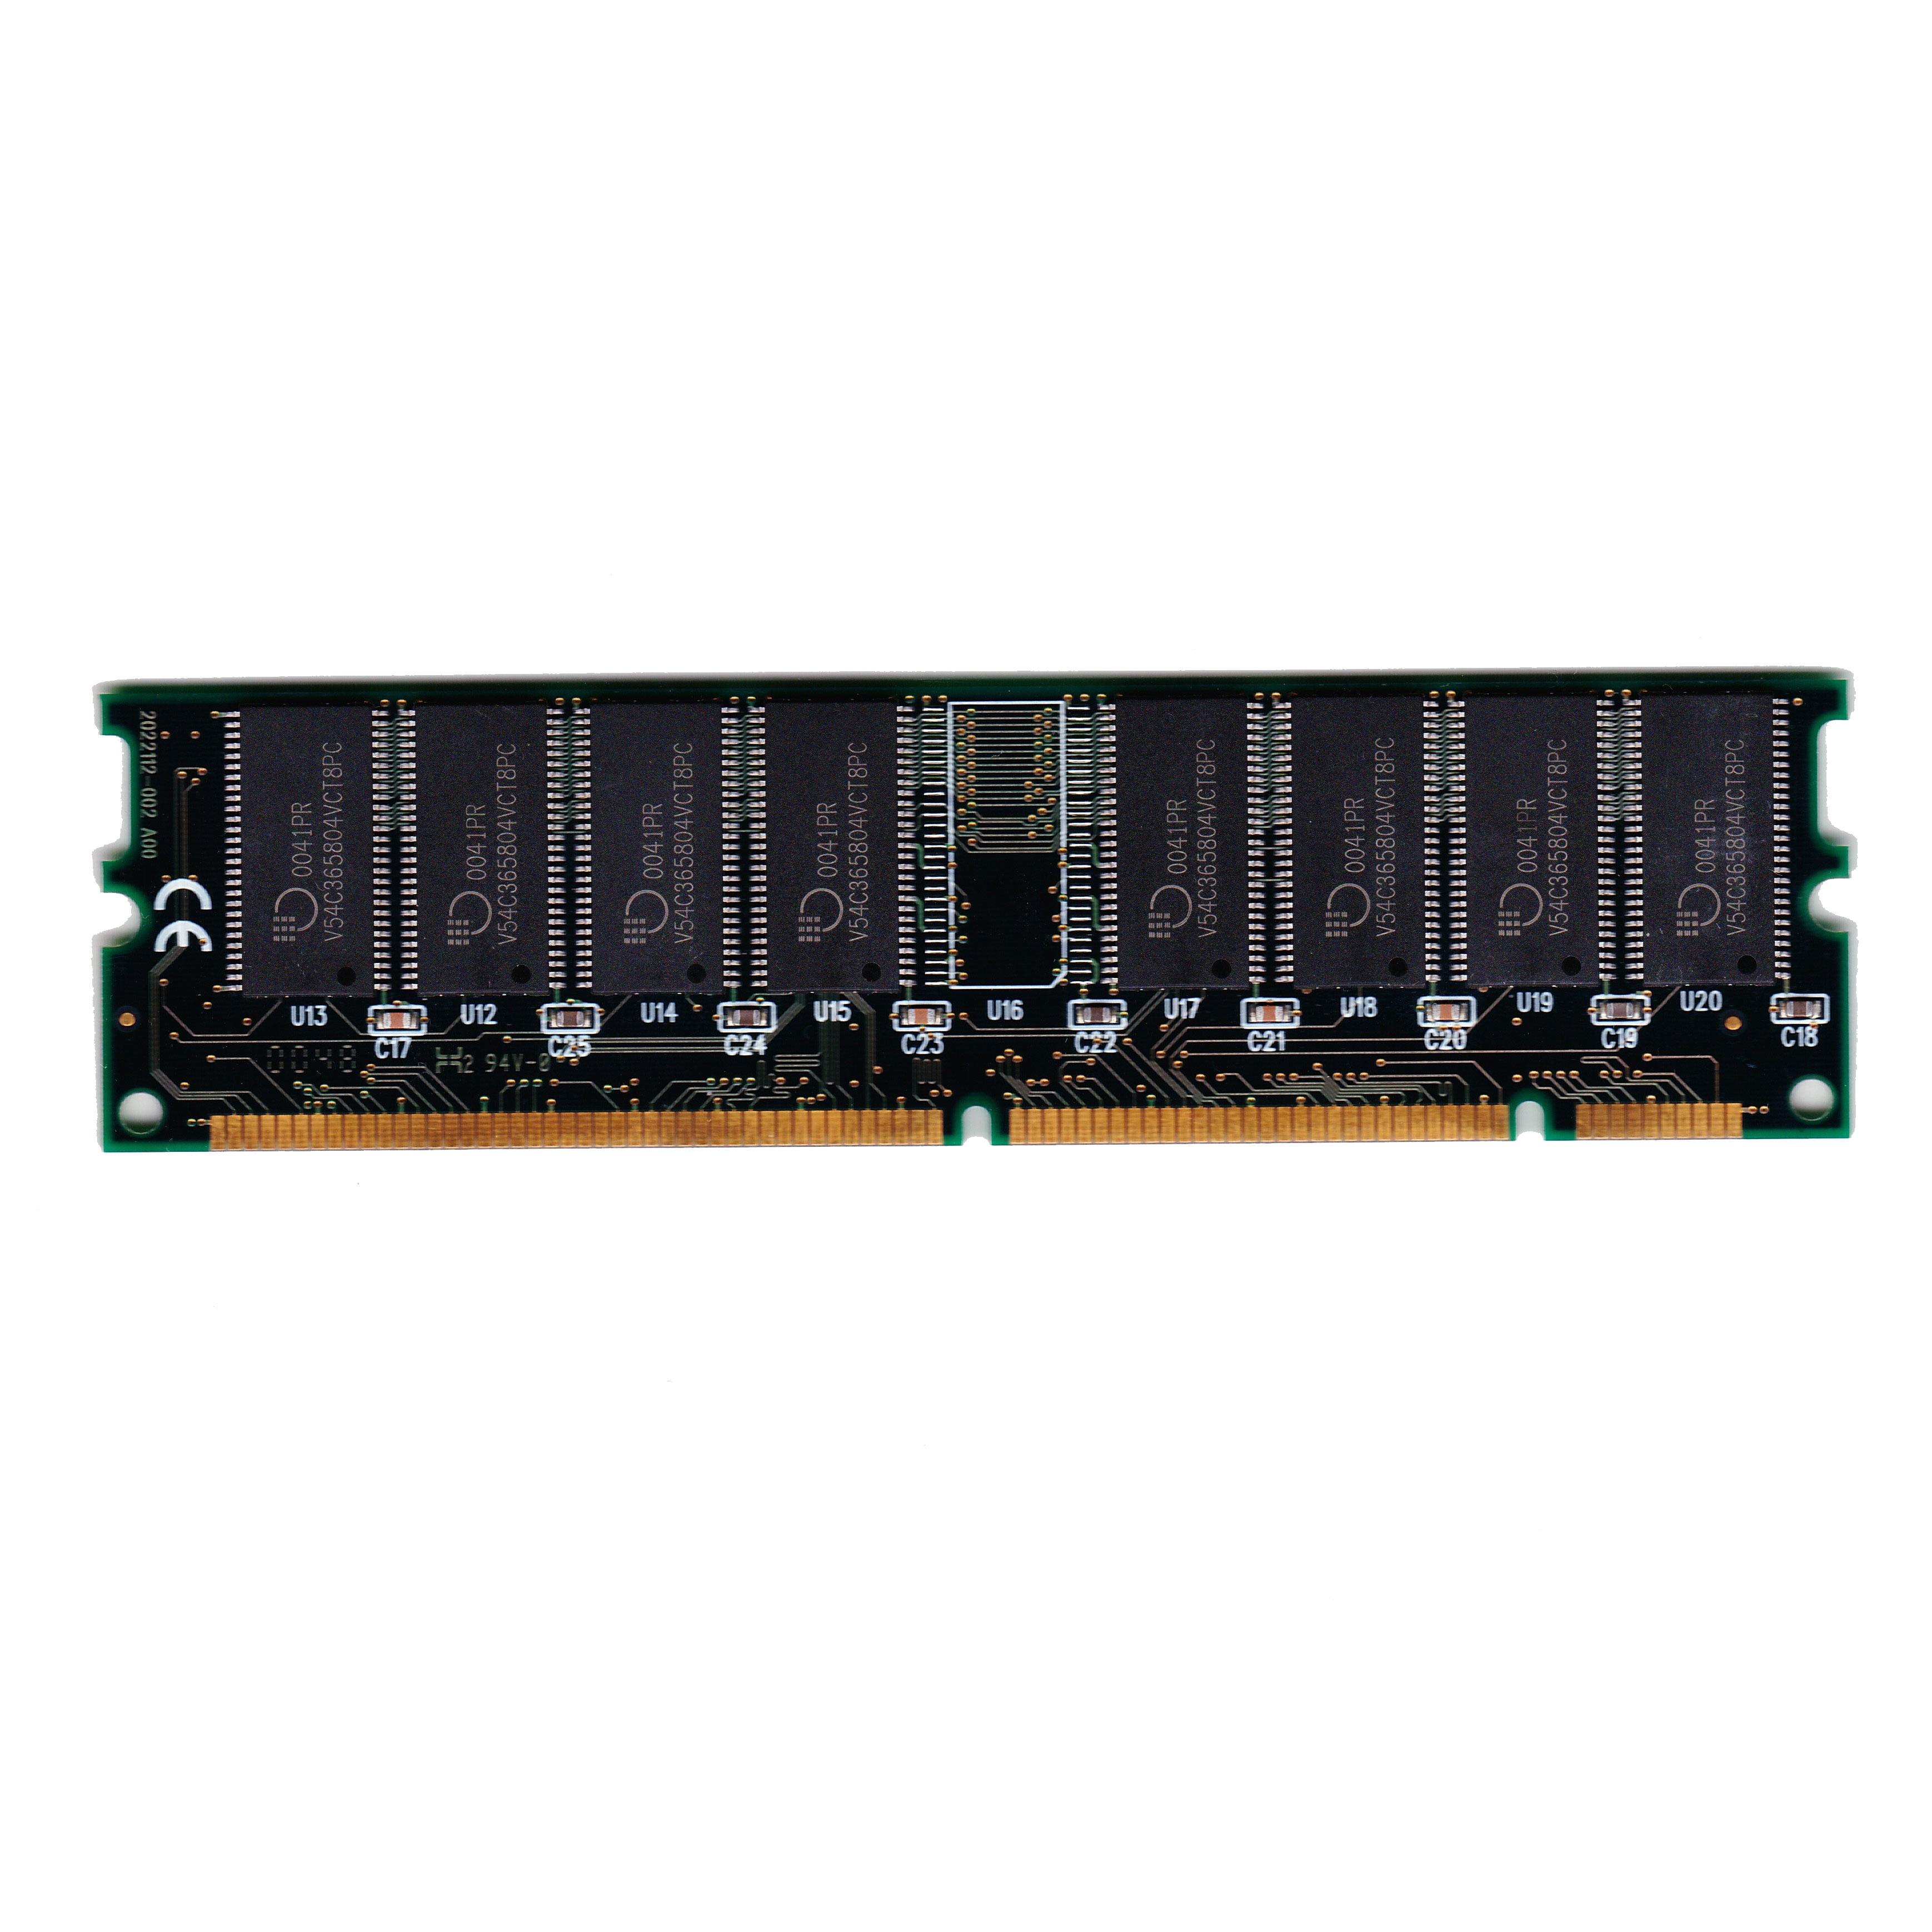 Preowned Kingston 128MB SDRAM 100MHz Untested DIMM (KTA-G4/128)